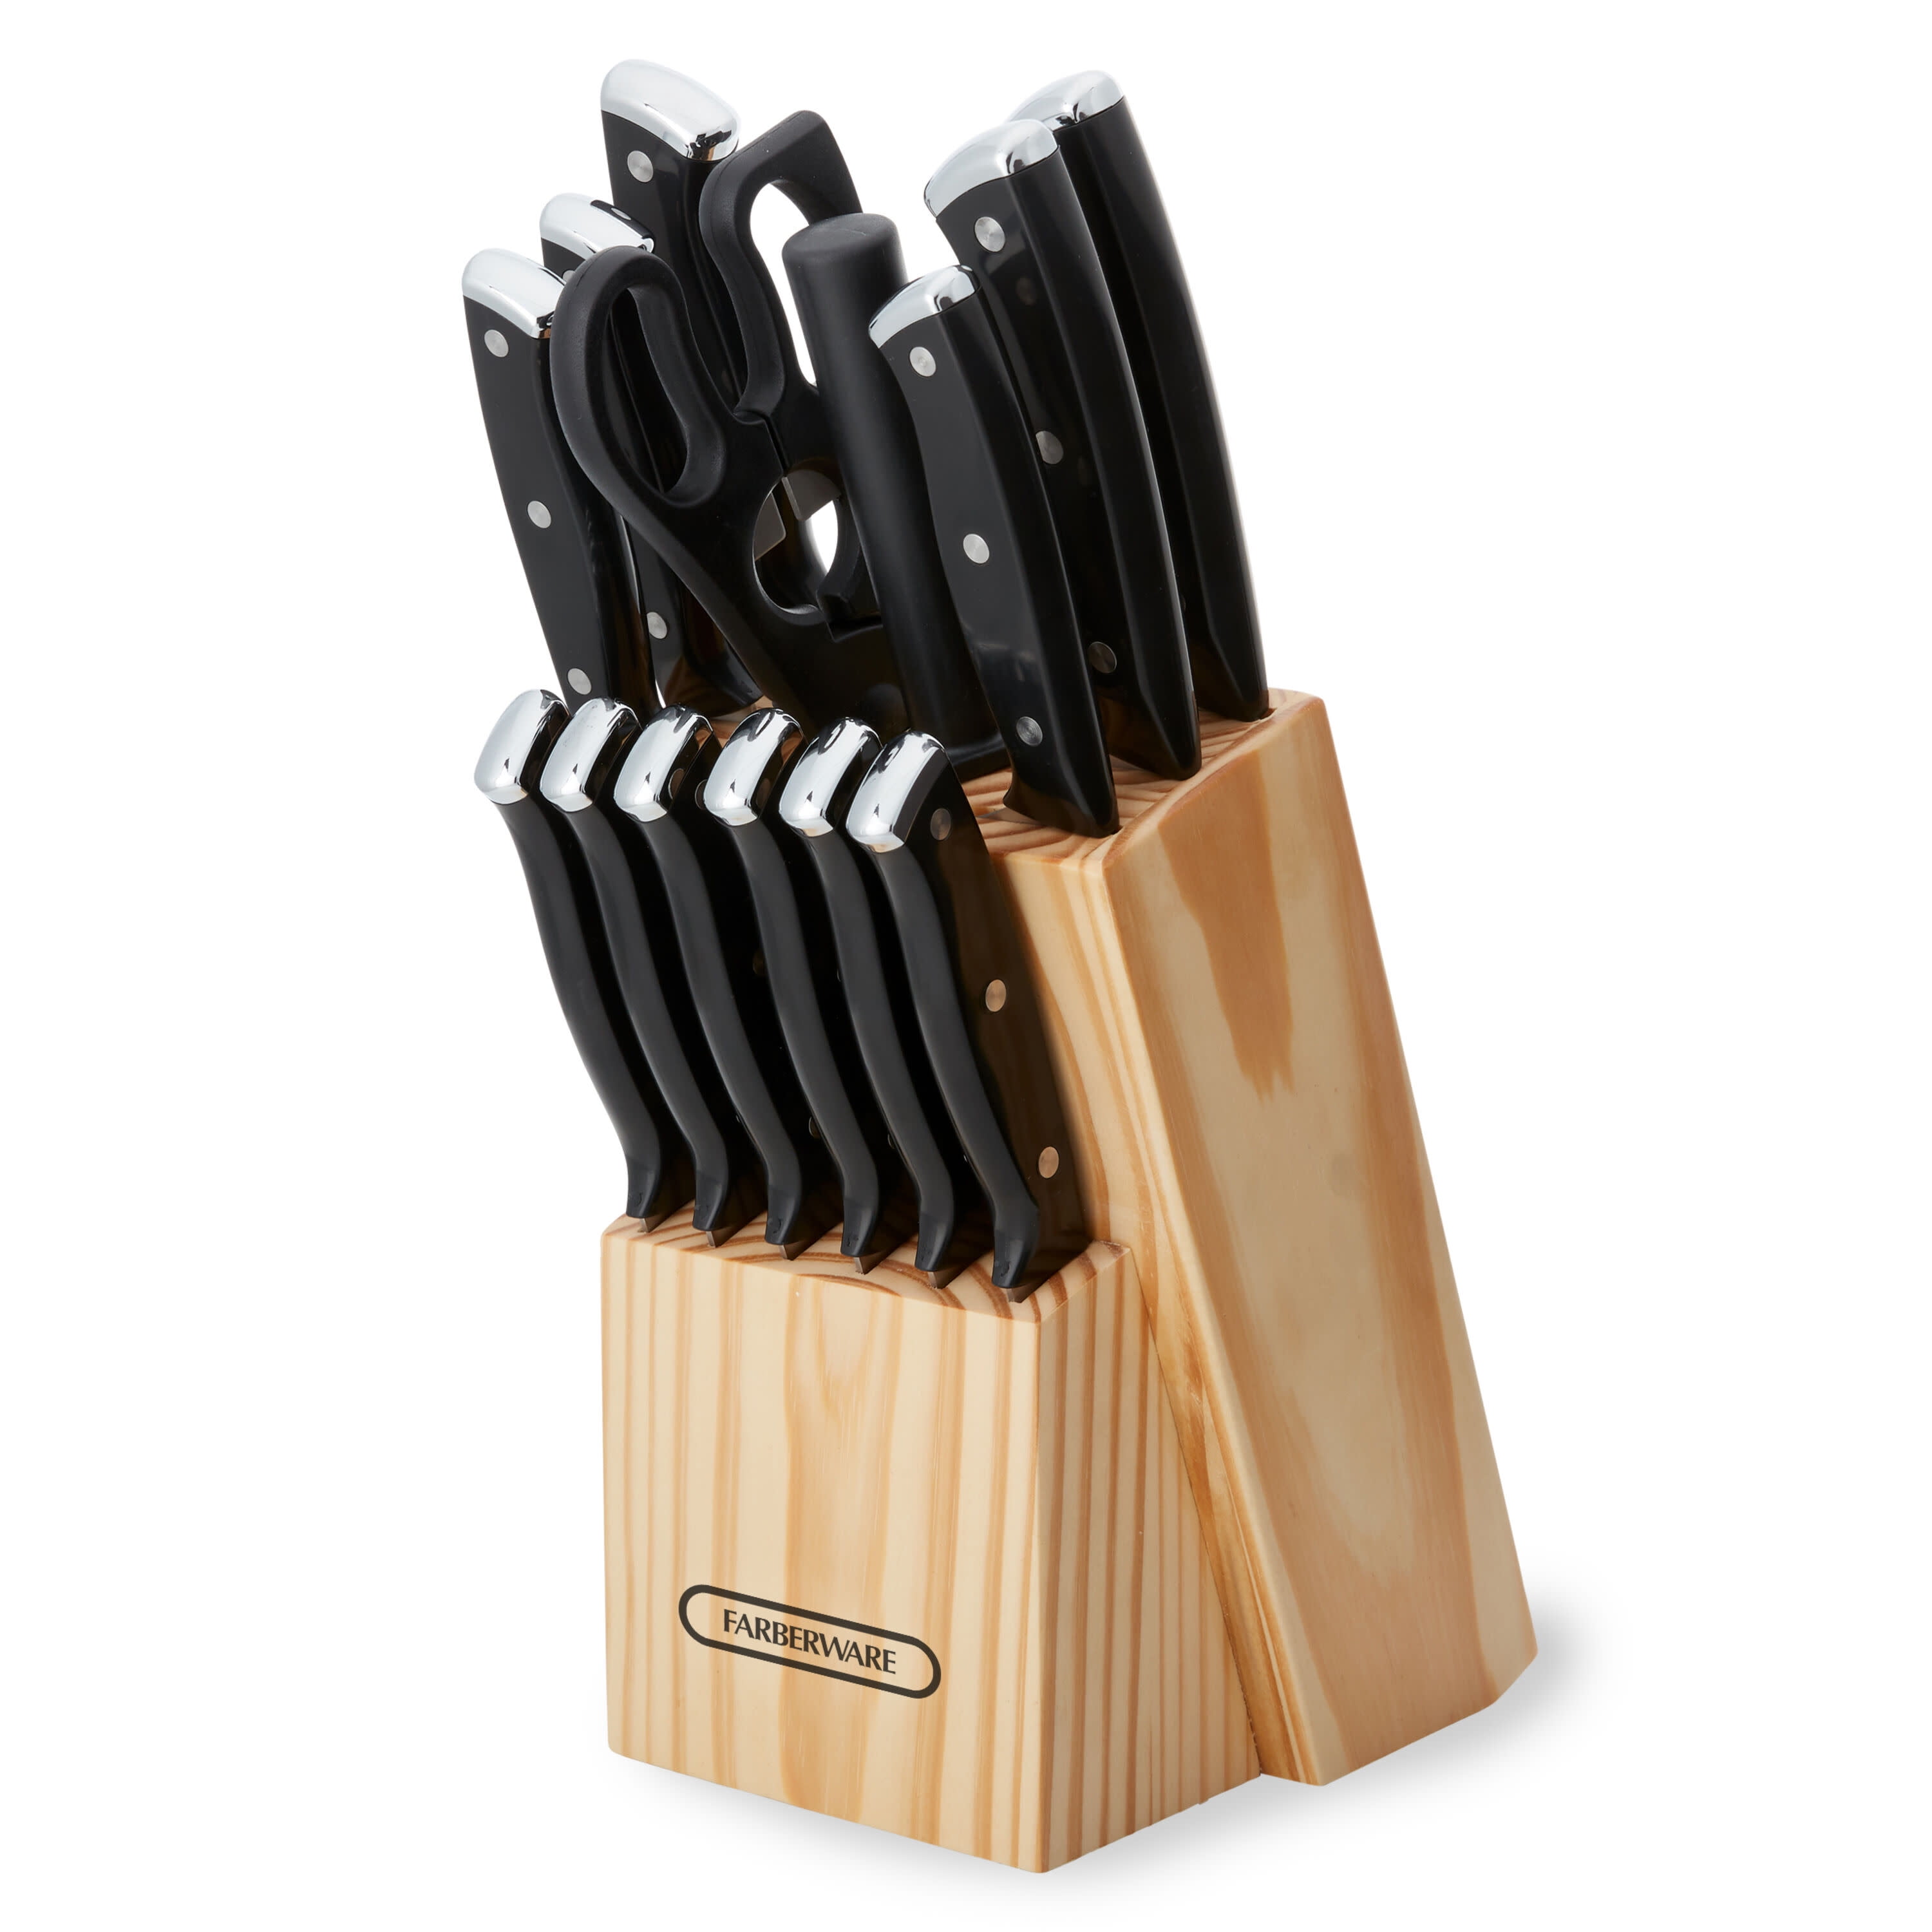 5-Piece Kitchen Set Black with Wood Red Resin Handle